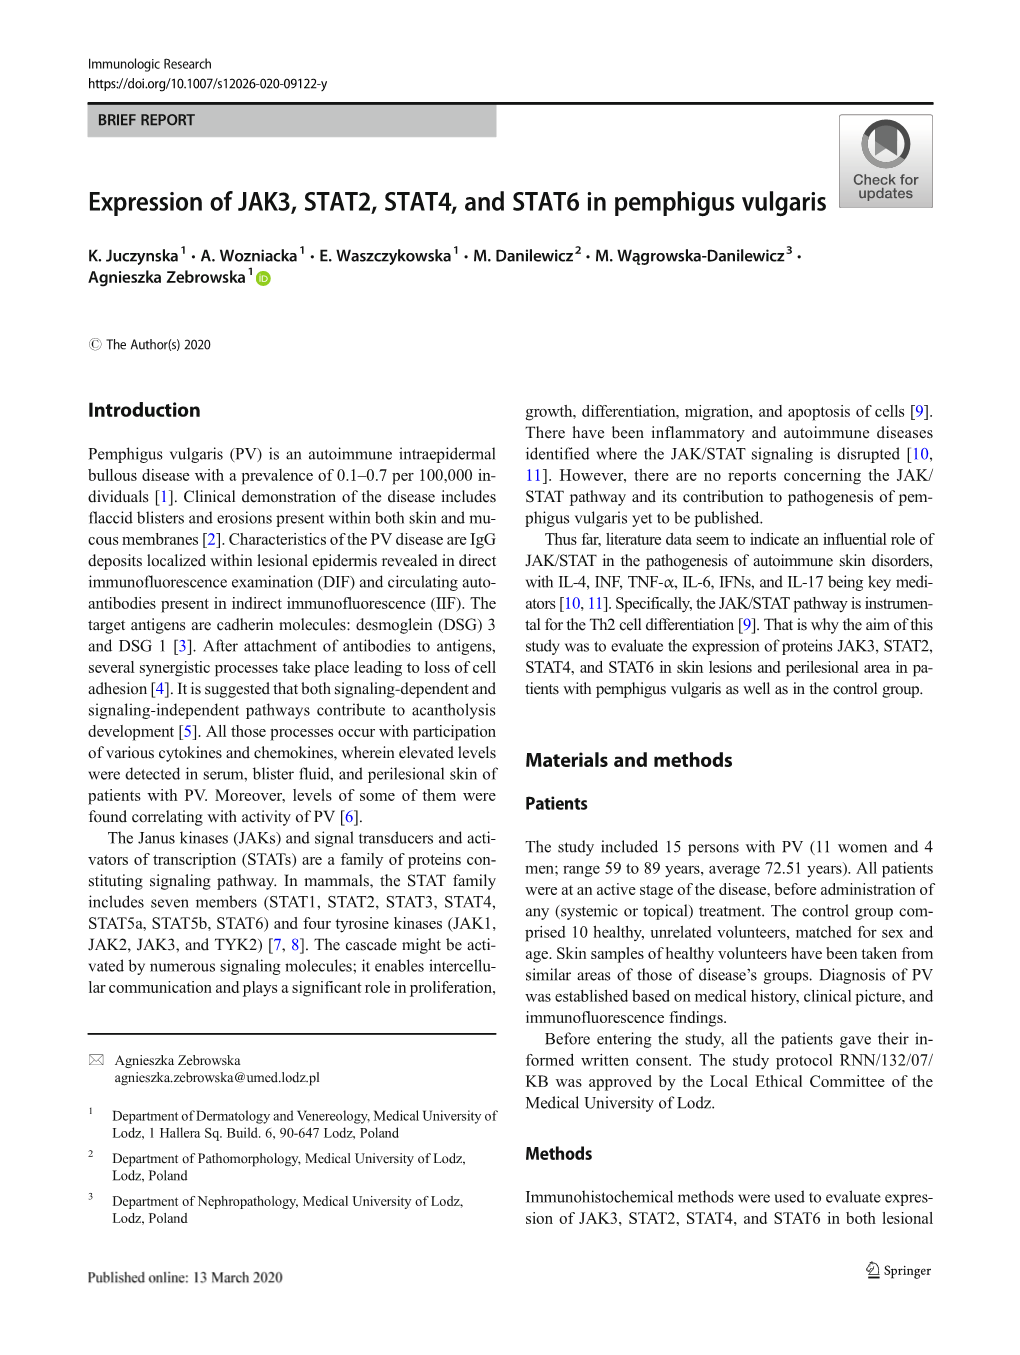 Expression of JAK3, STAT2, STAT4, and STAT6 in Pemphigus Vulgaris